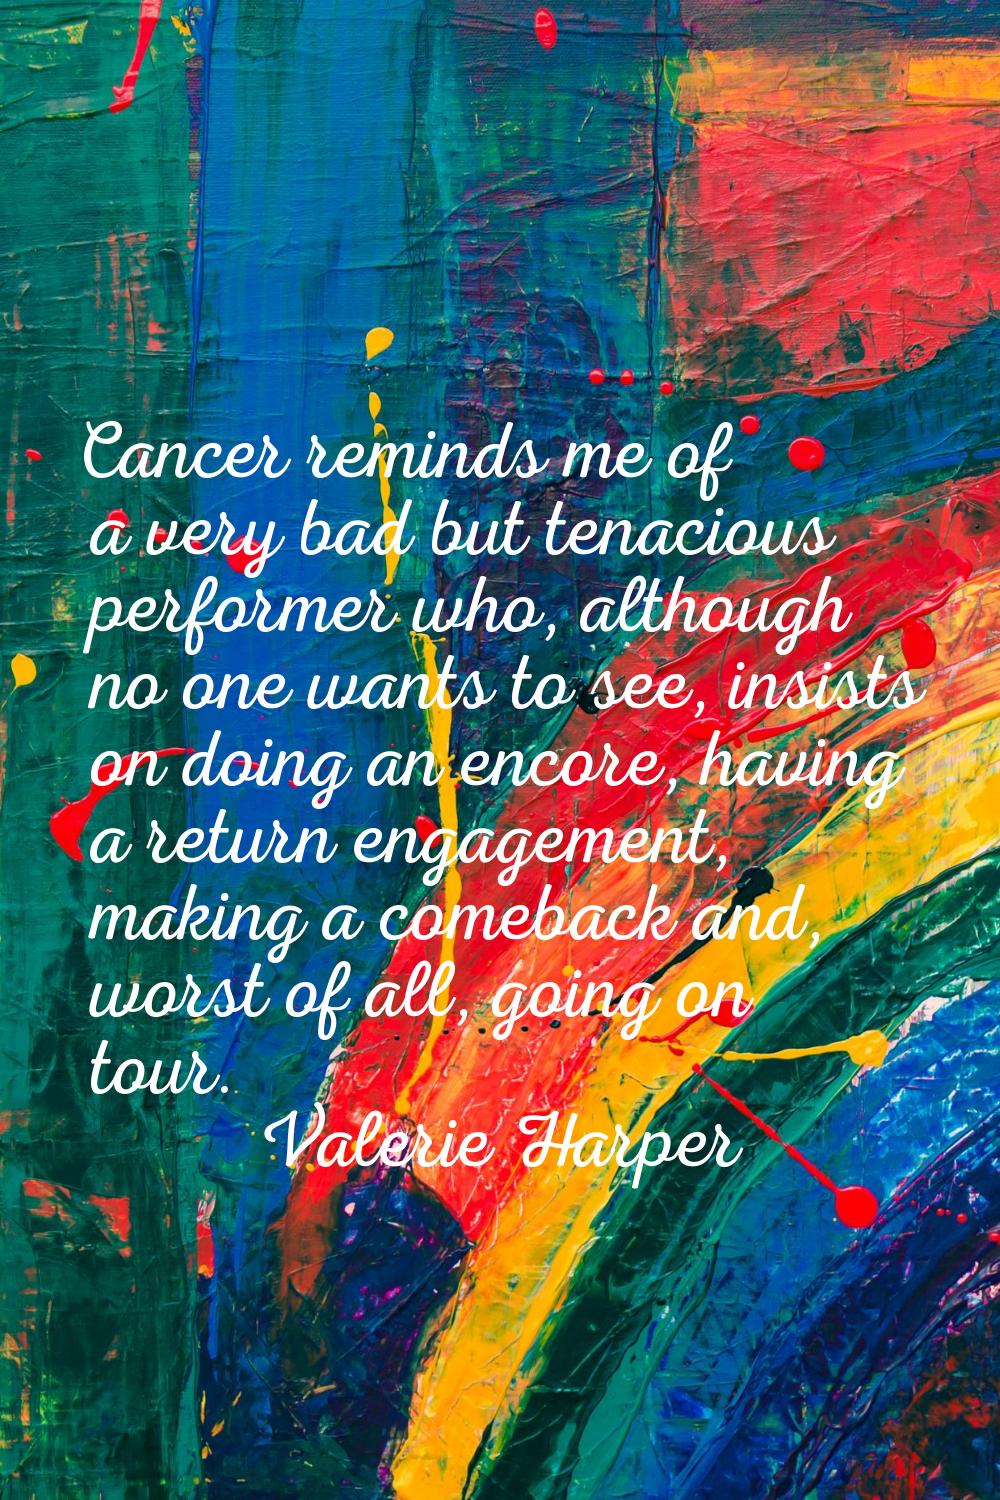 Cancer reminds me of a very bad but tenacious performer who, although no one wants to see, insists 